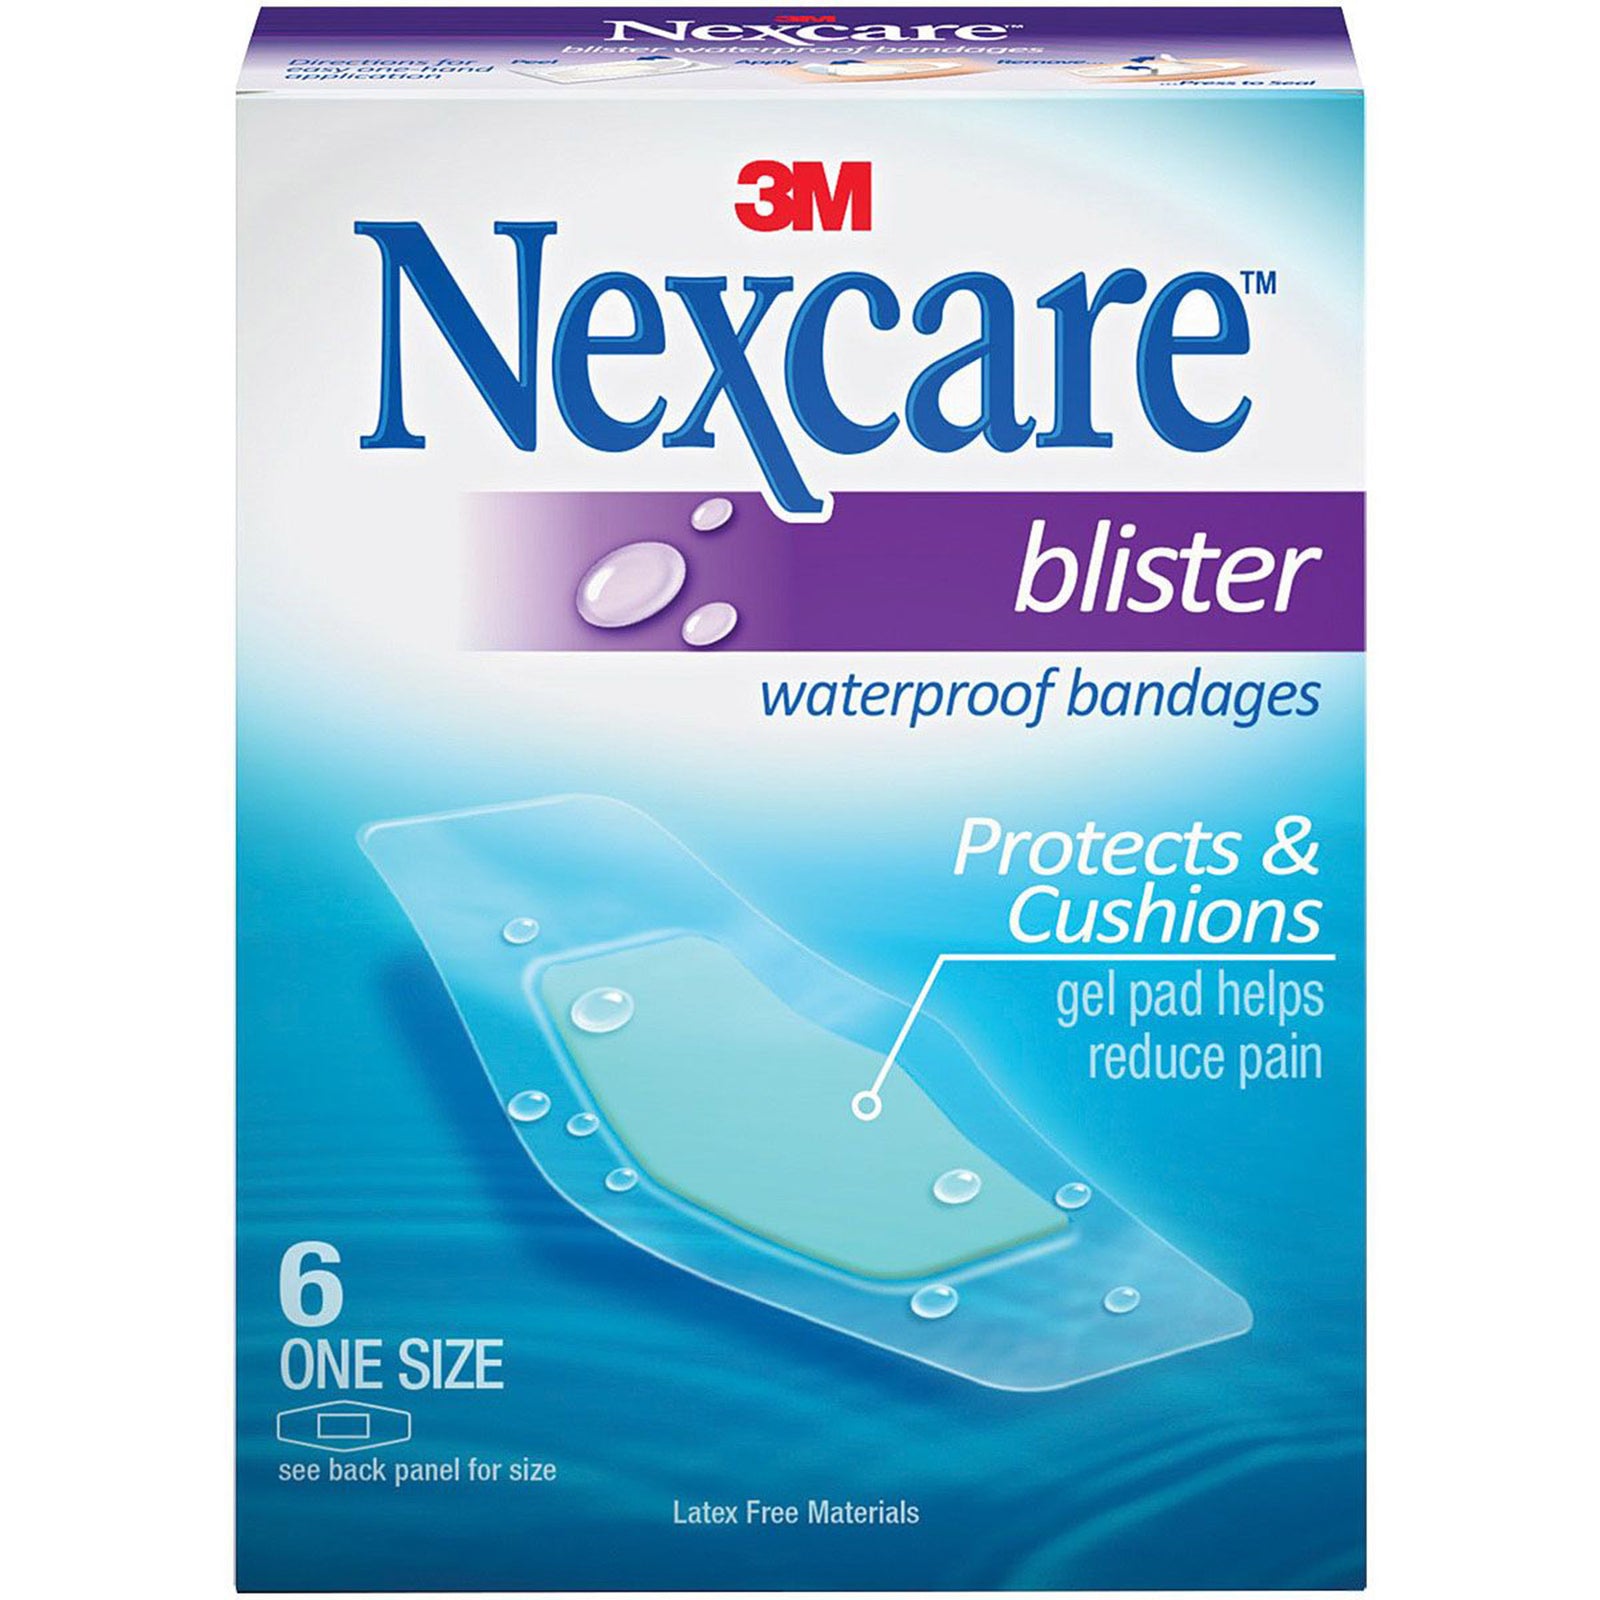 the box that nexcare blister bandages come in, showing a bandage